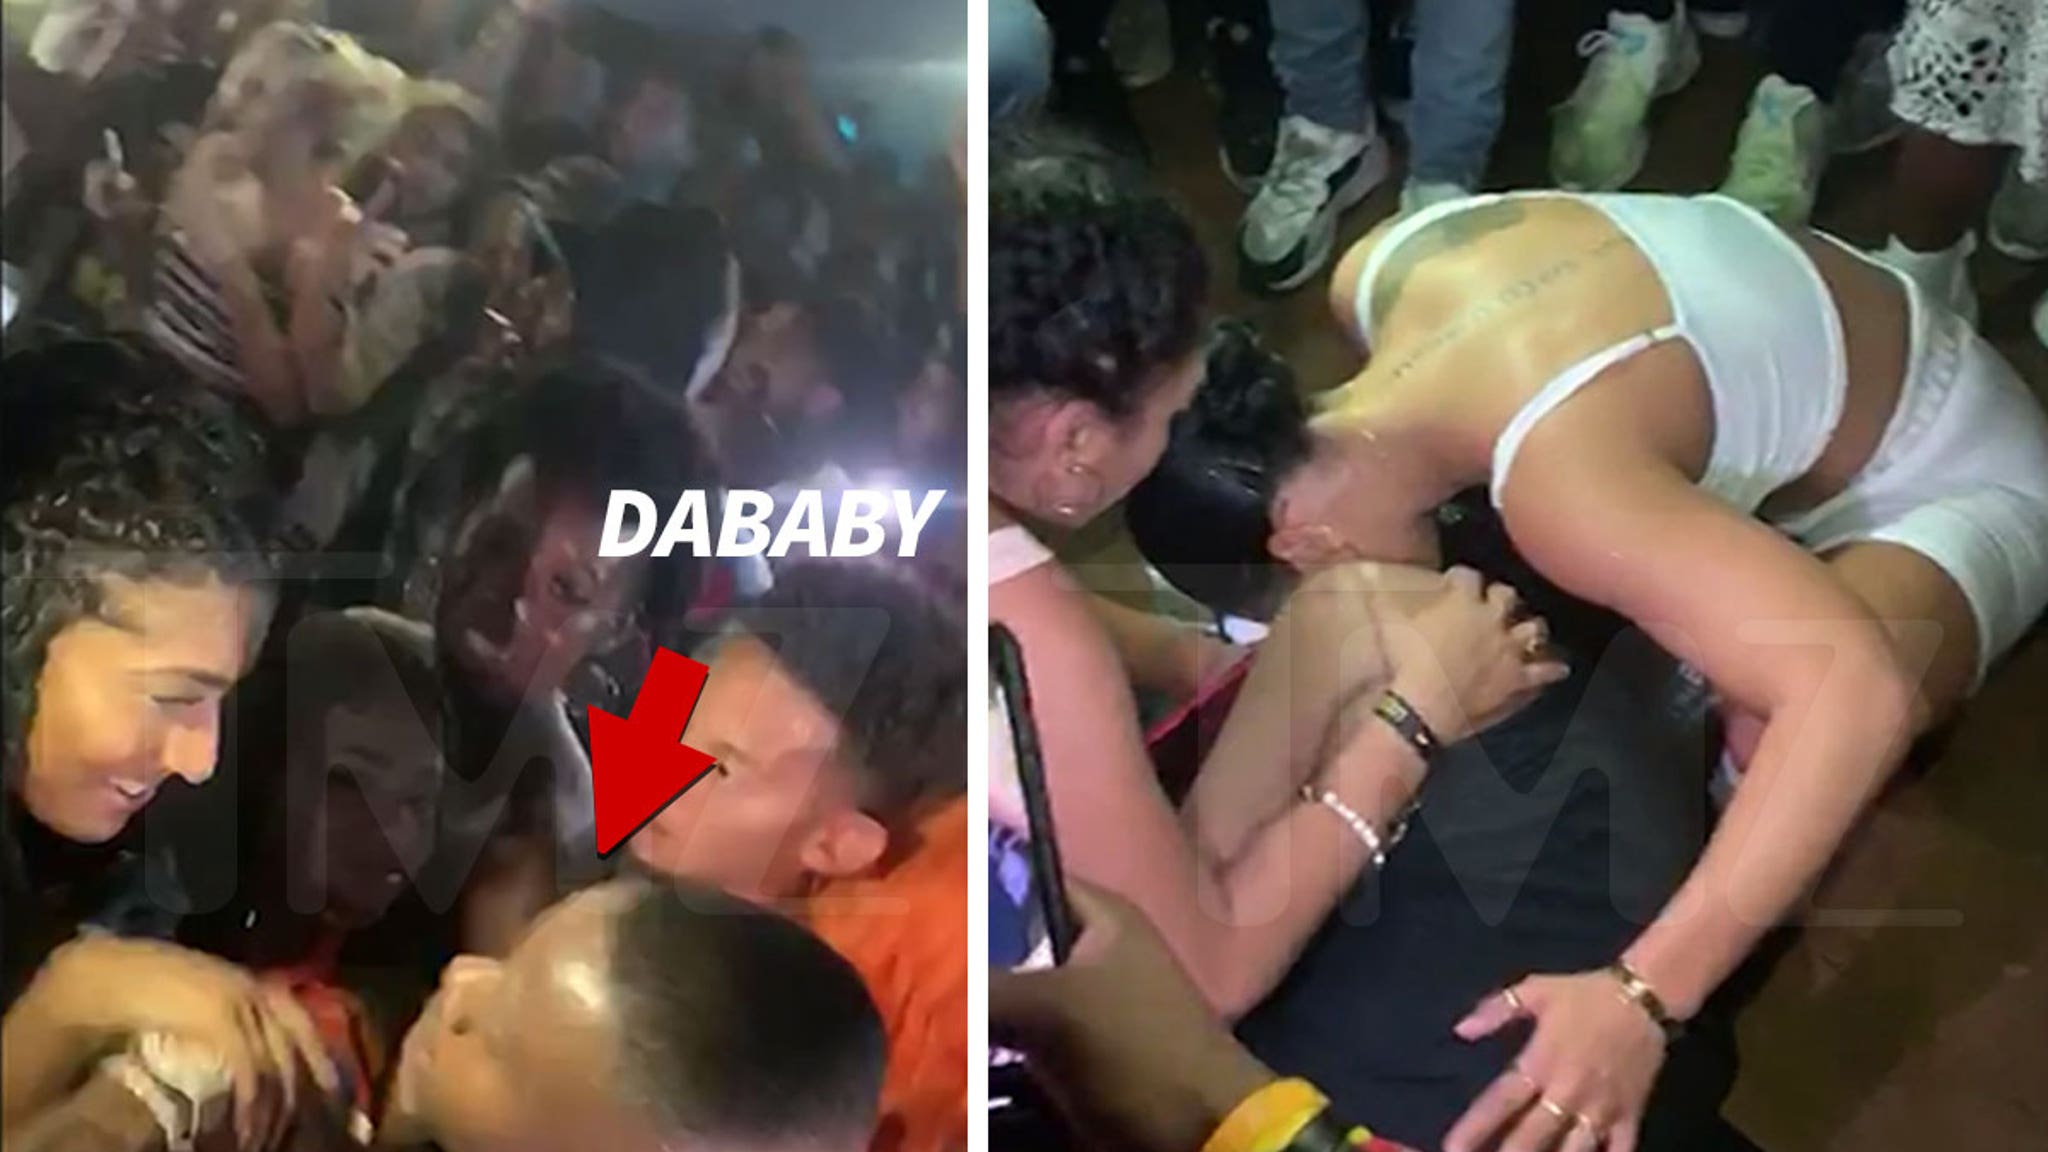 DaBaby Security Knocks Female Fan Out Cold During Concert.